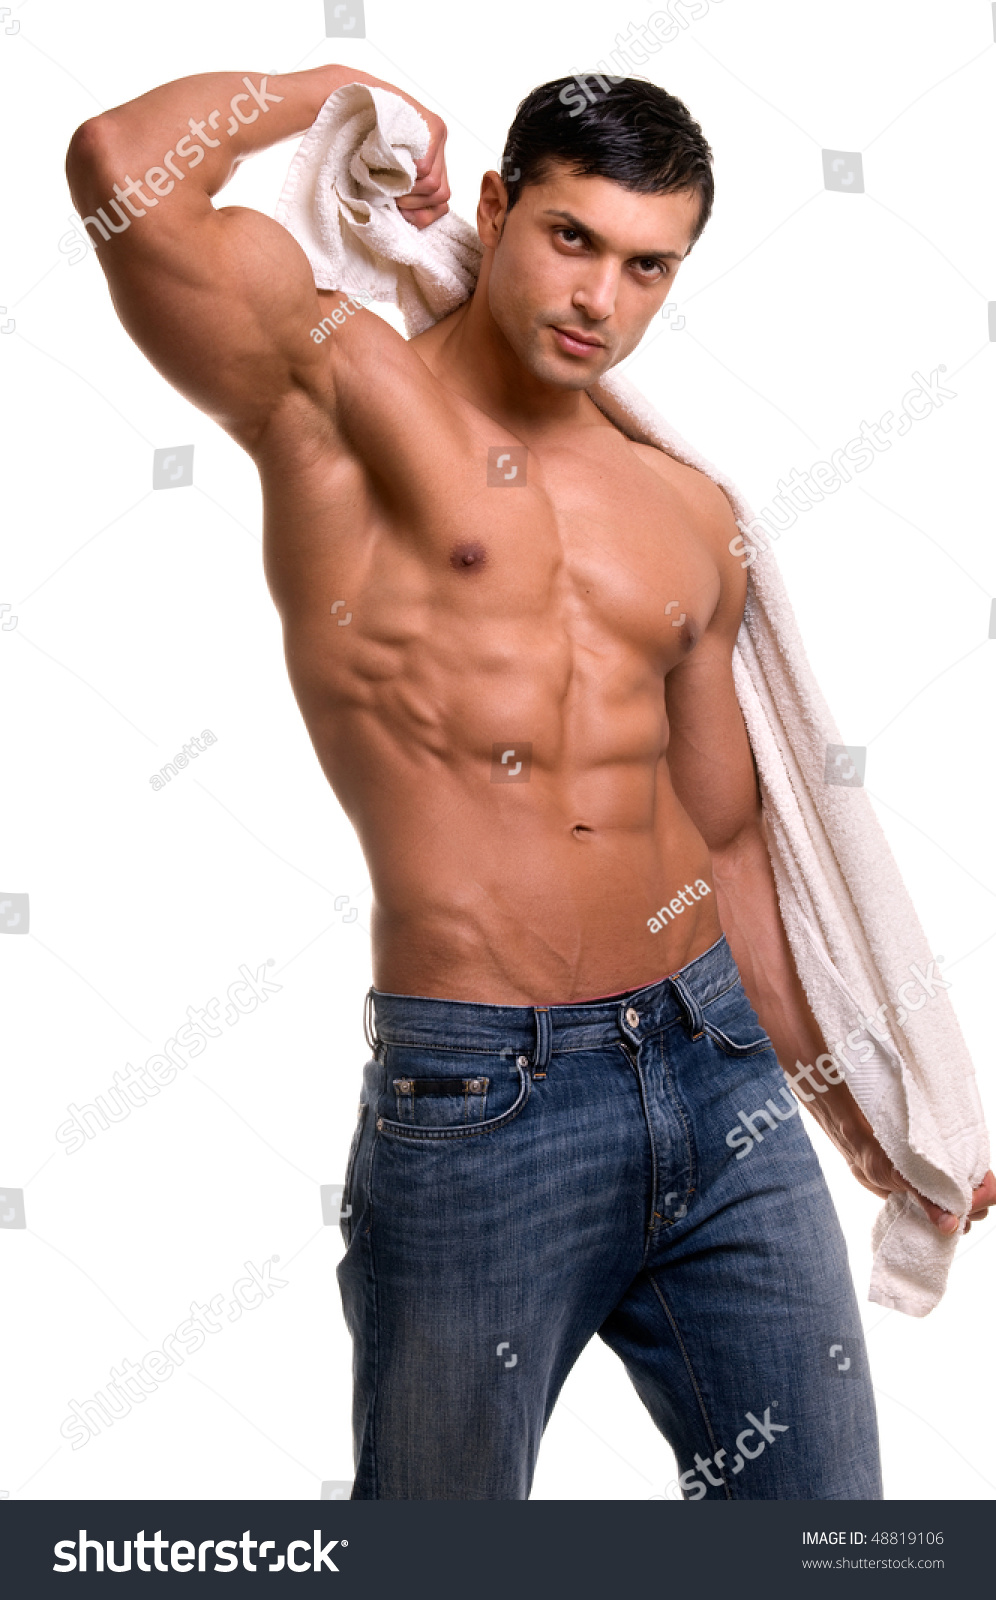 Muscular African American Man With No Shirt Holding Towel 